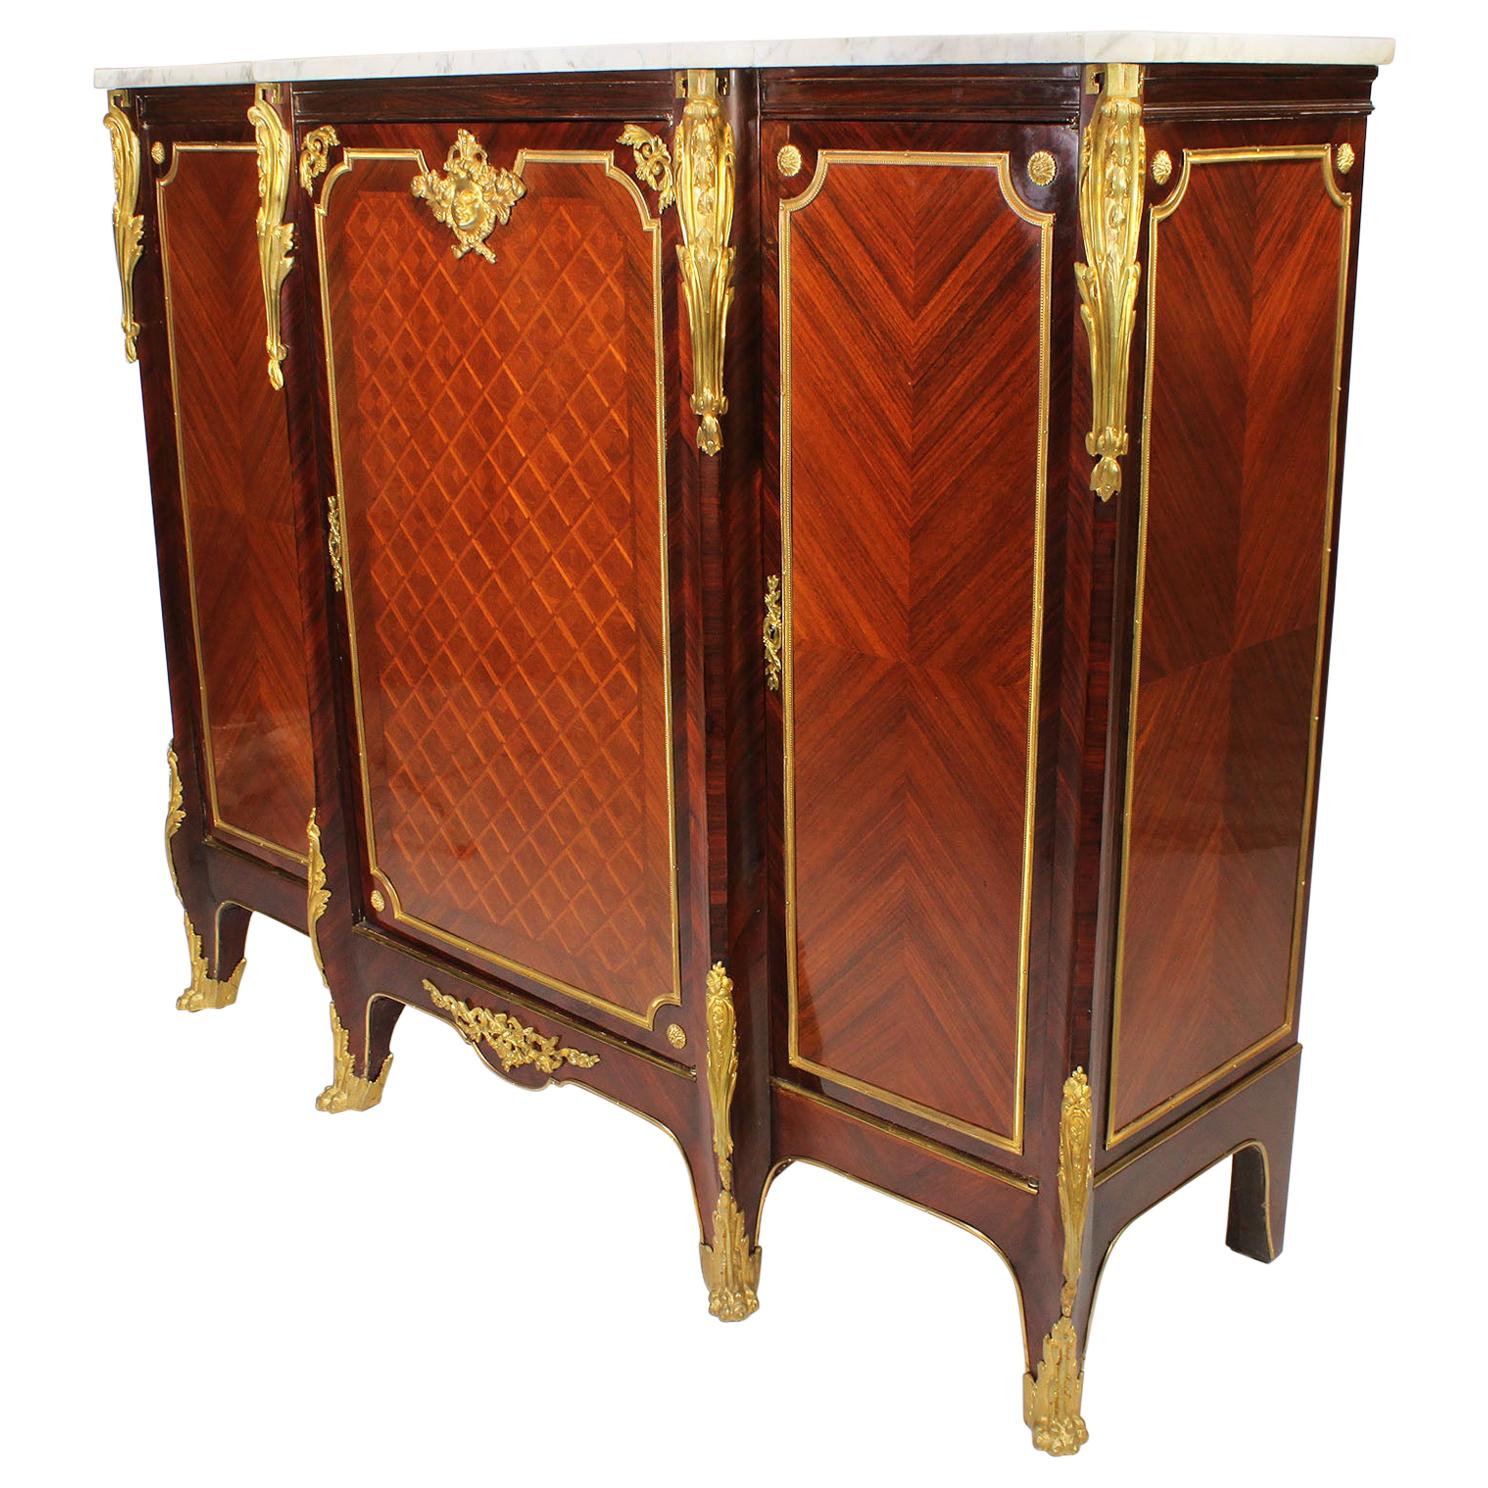 French 19th-20th Century Louis XV Style Tulipwood & Gilt-Bronze Mounted Cabinet For Sale